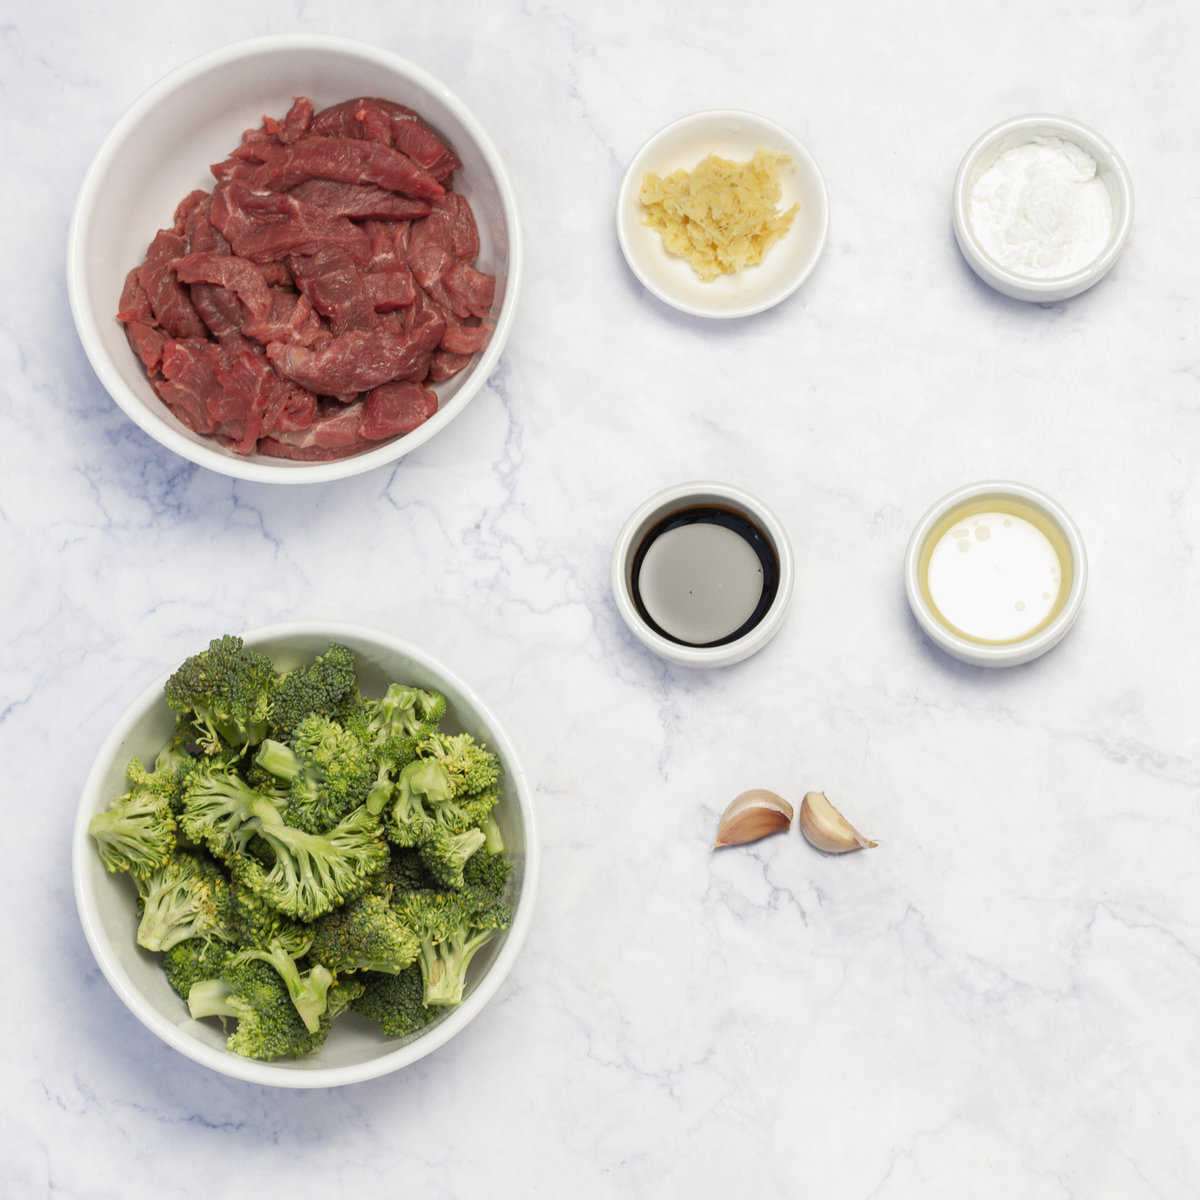 Weight Watchers Beef and Broccoli Ingredients